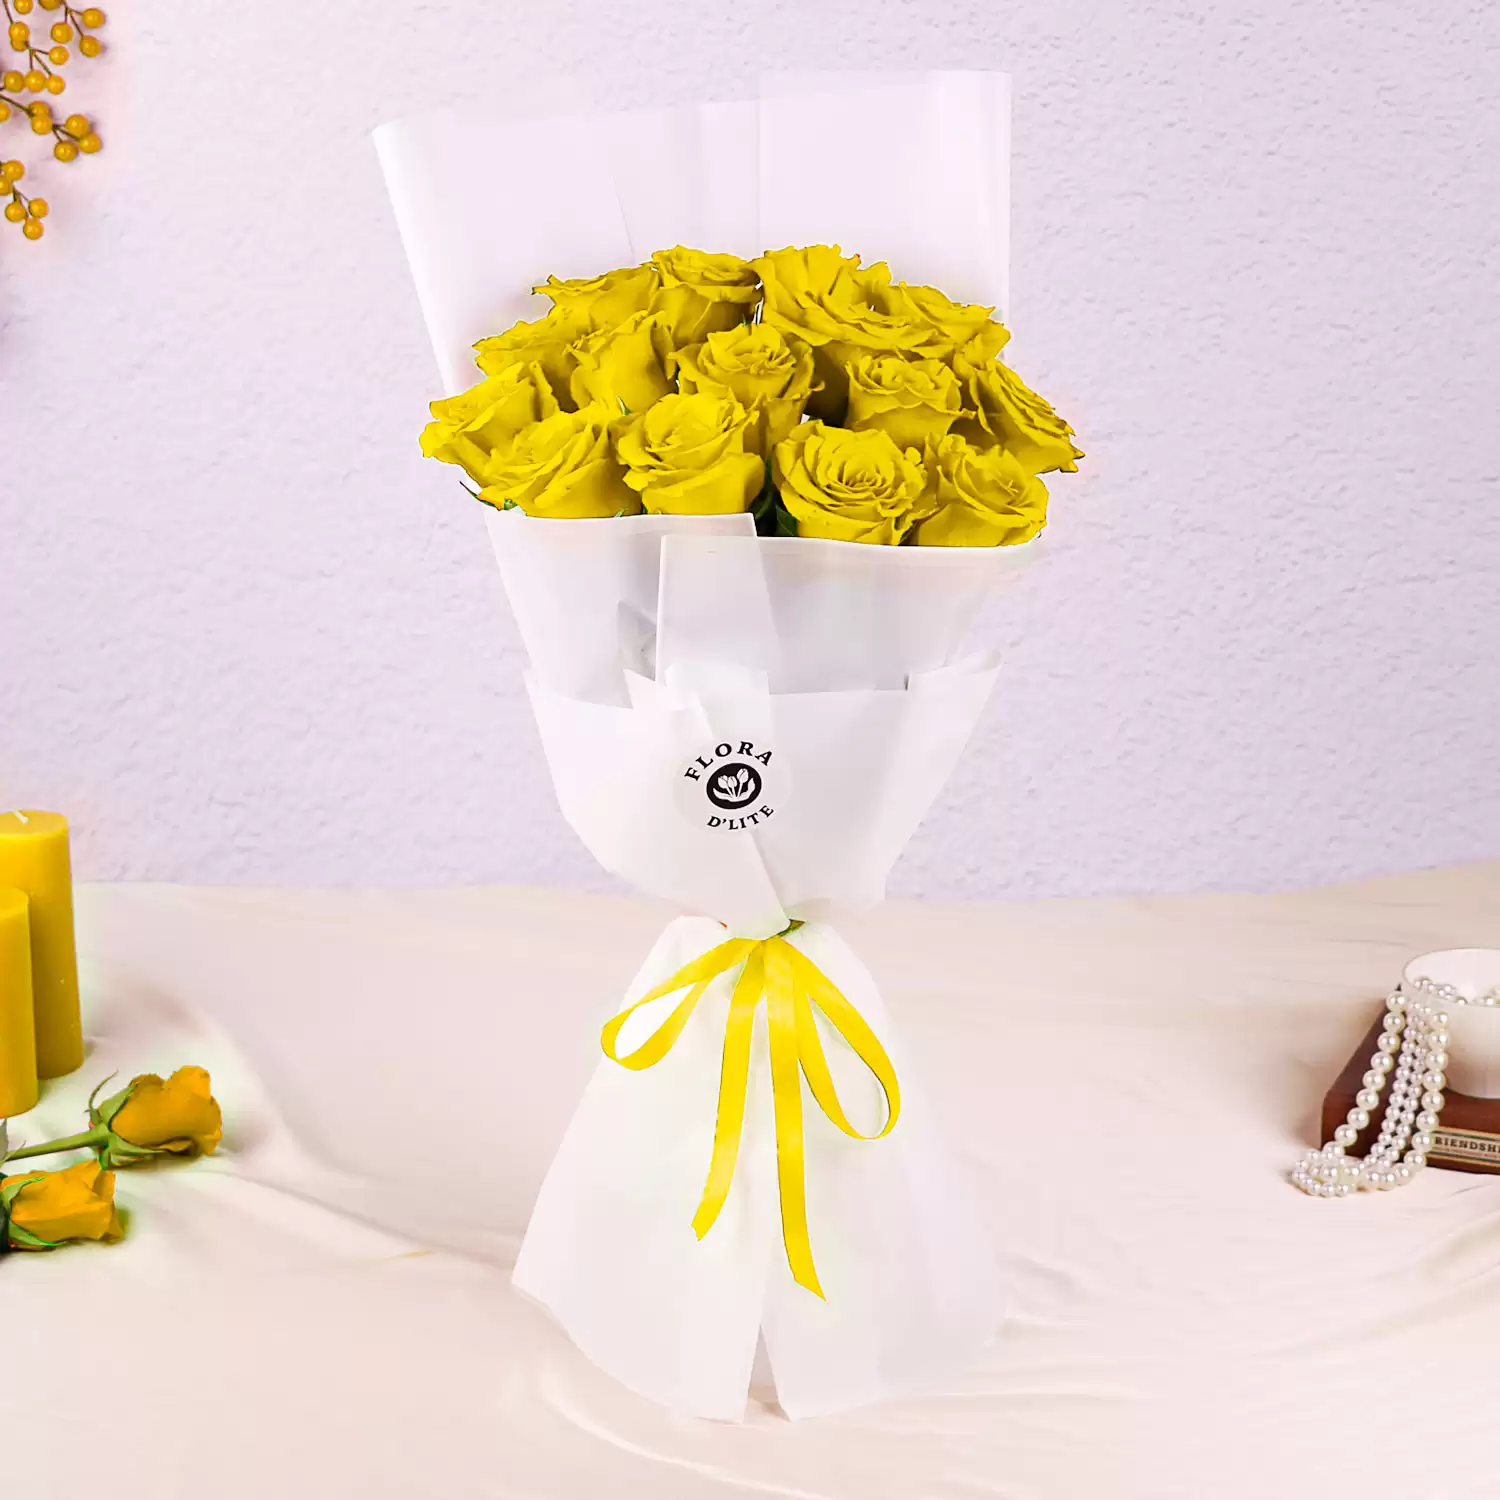 15 Yellow Roses | Buy Roses Online | Flowers Delivery Bahrain - Flora D'lite